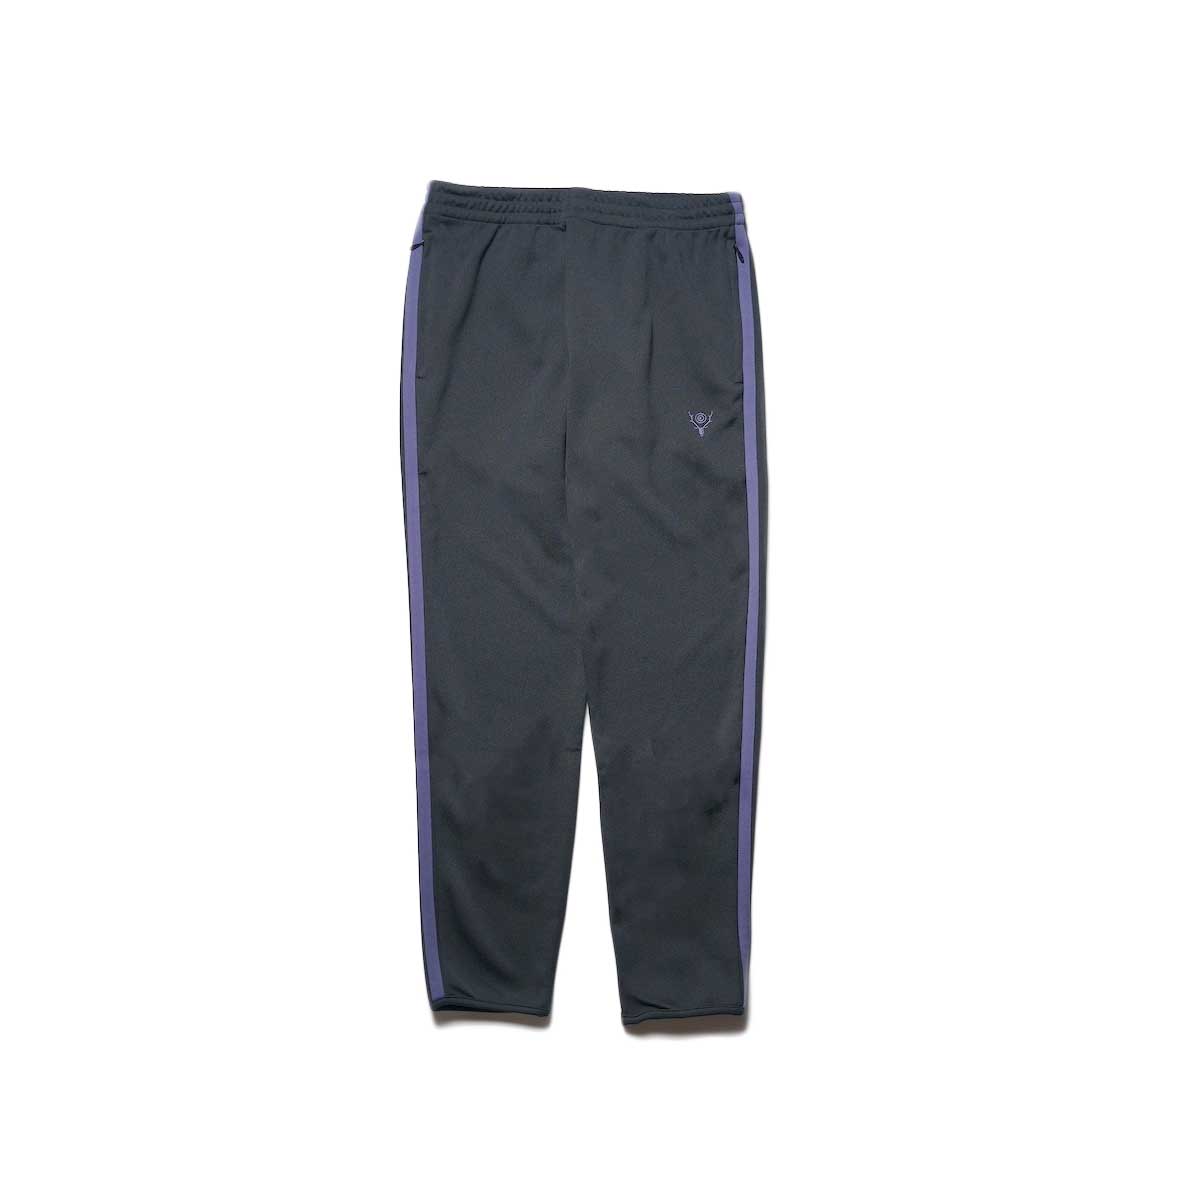 South2 West8 / TRAINER PANT - POLY SMOOTH (Black)